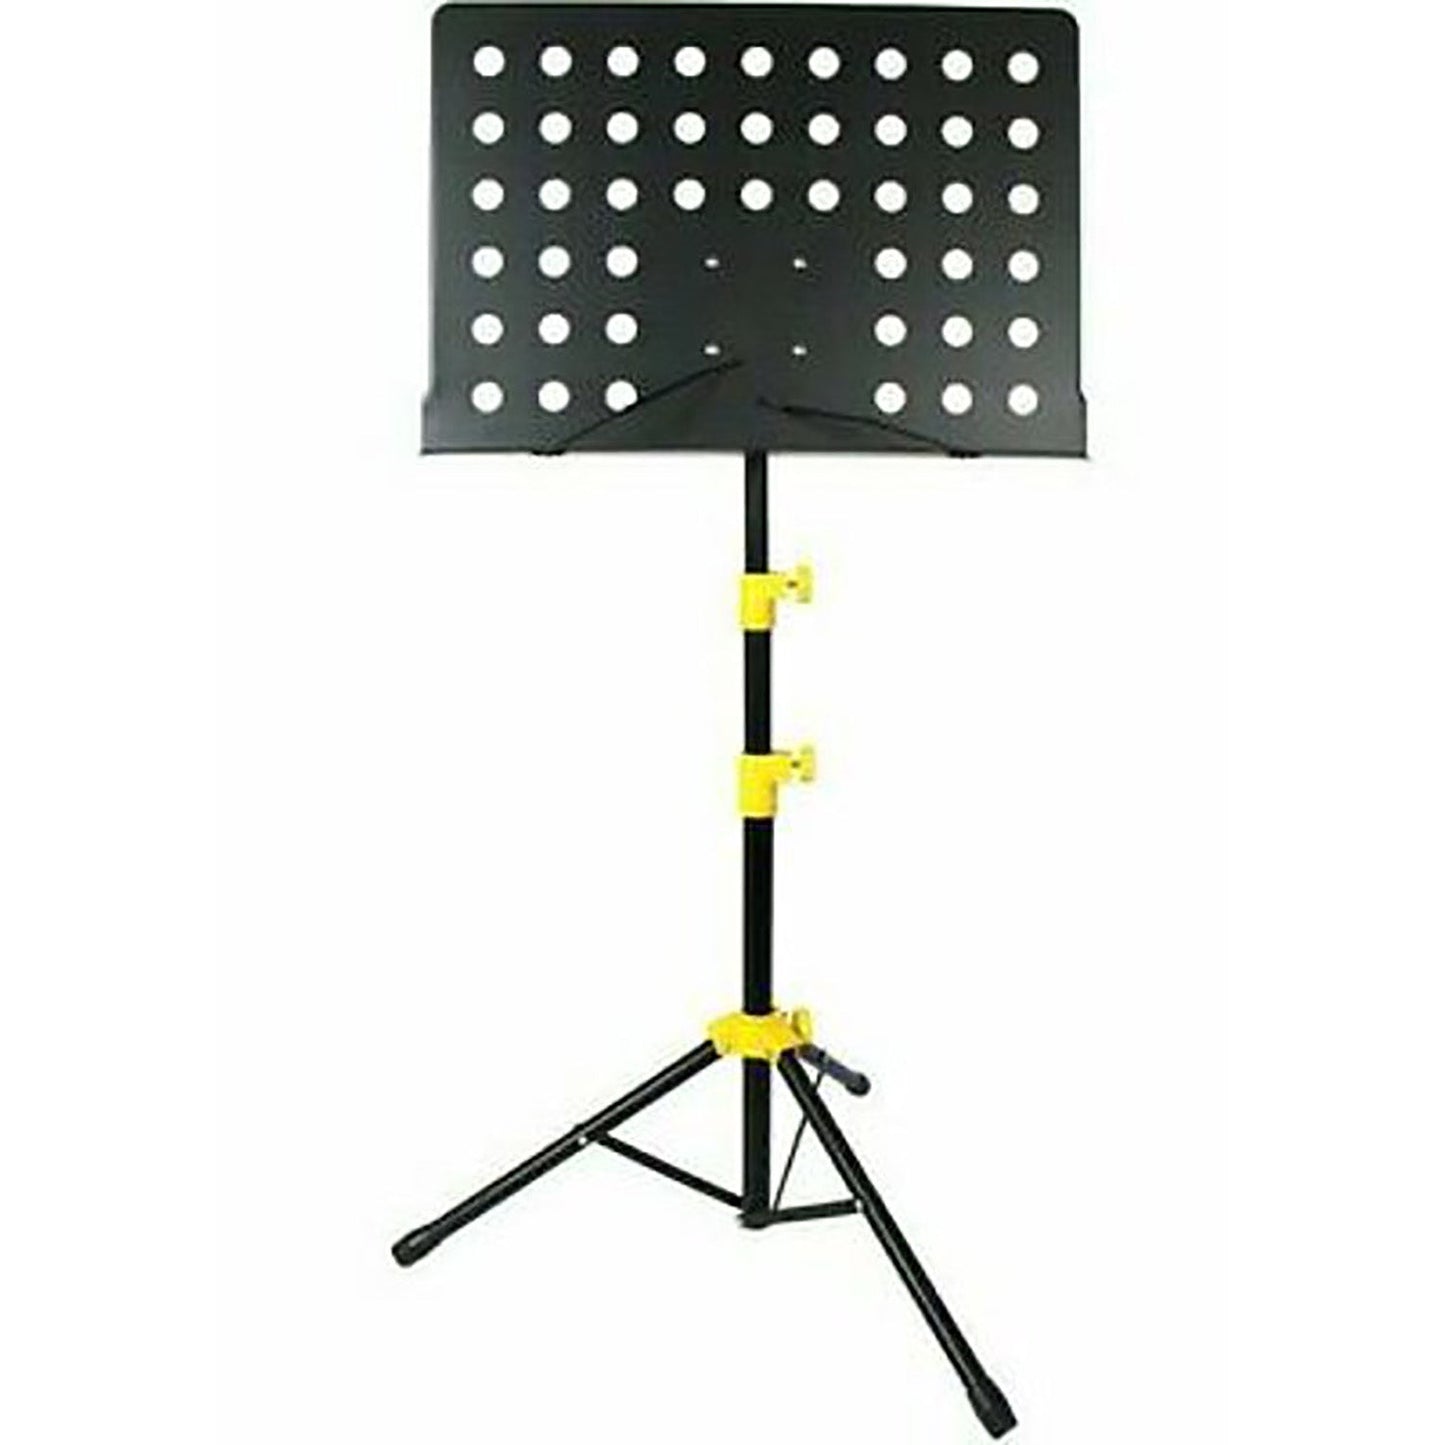 5 Core Sheet Music Stand Professional Folding Adjustable Portable